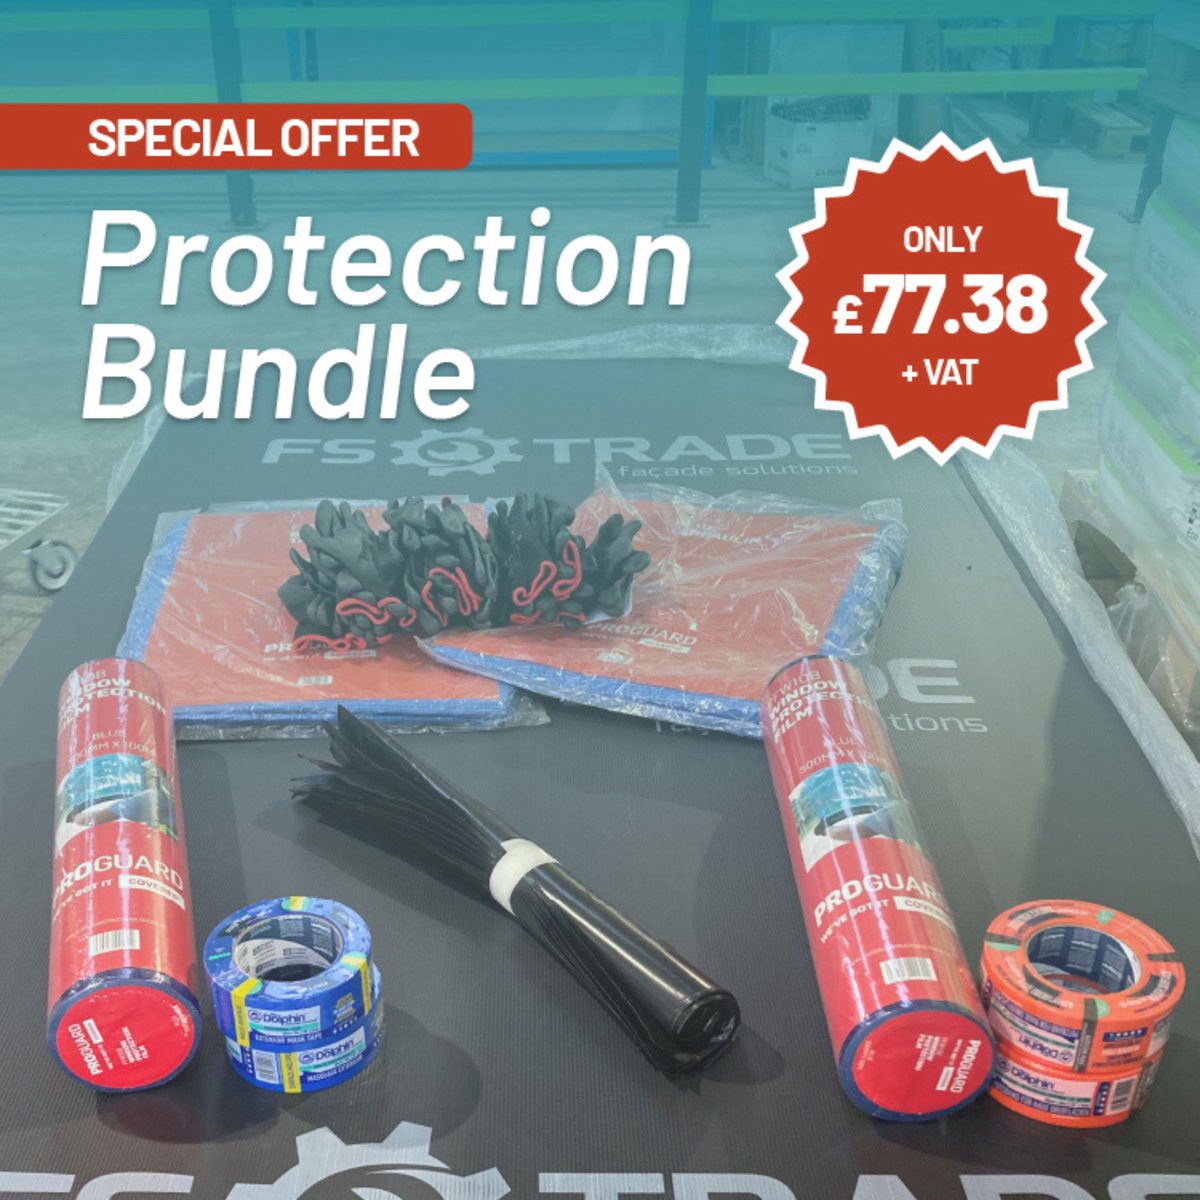 To make things as easy as possible for trades, we’ve created our protection bundle. This can be purchased for just £77.38 (+VAT) To place an order, give our team a call or pop into our site: 📞 0151 363 1677 📍 Units 1-2, Link Estate, Link Road, Huyton, Liverpool, L36 6AP